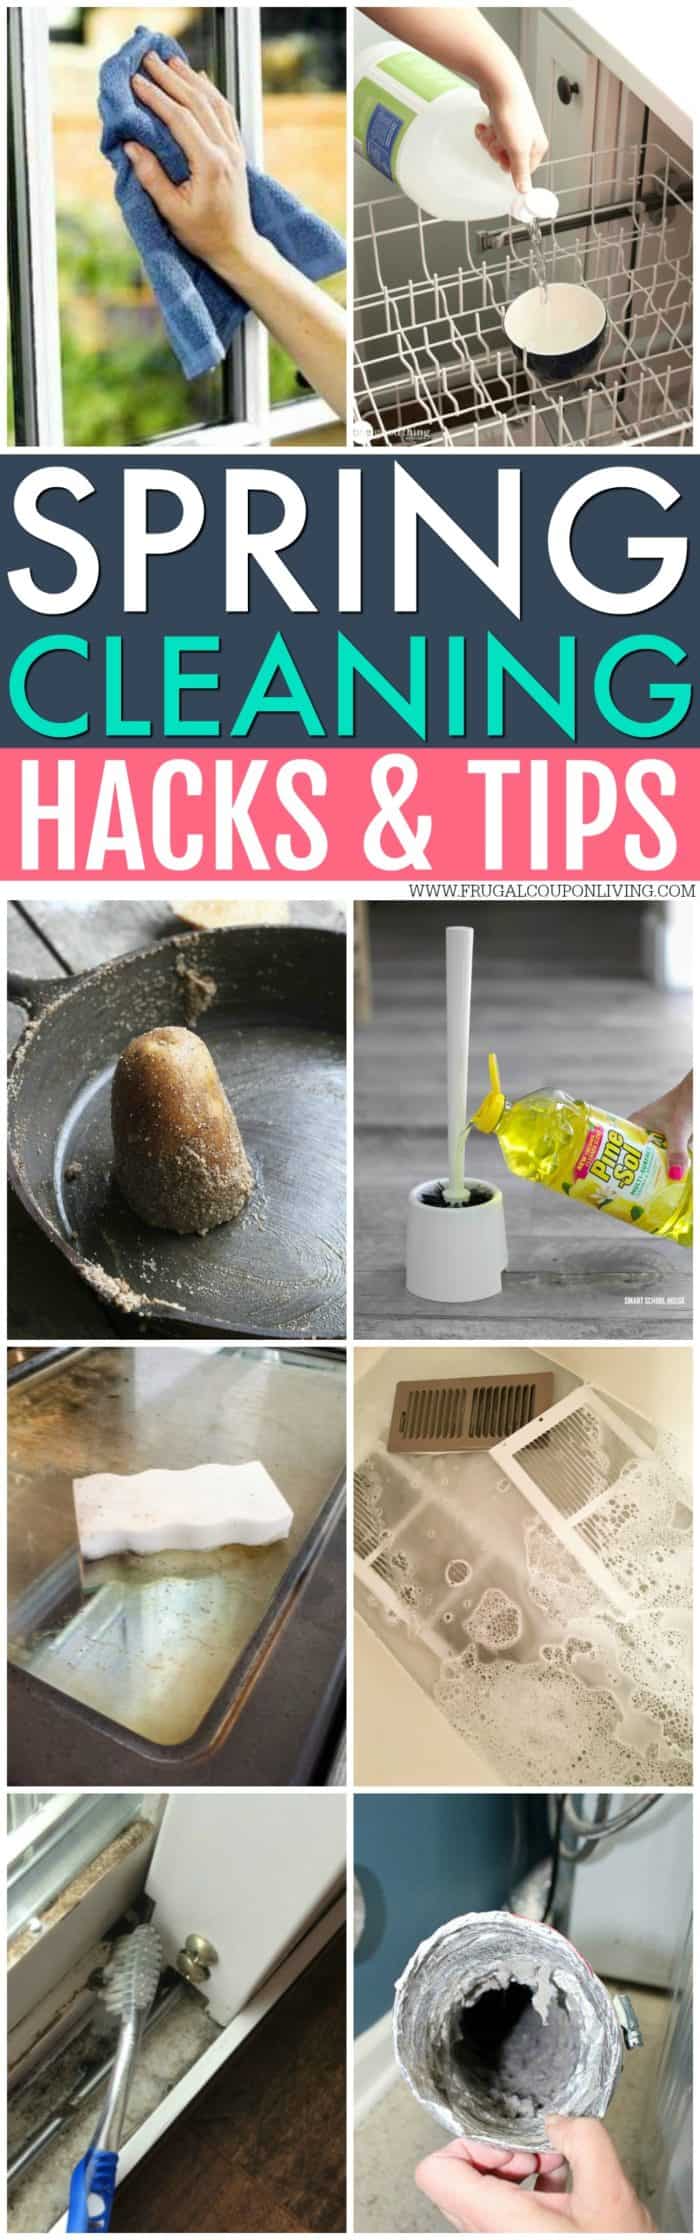 Spring Cleaning Tips and Hacks - Tackling the Neglected Areas